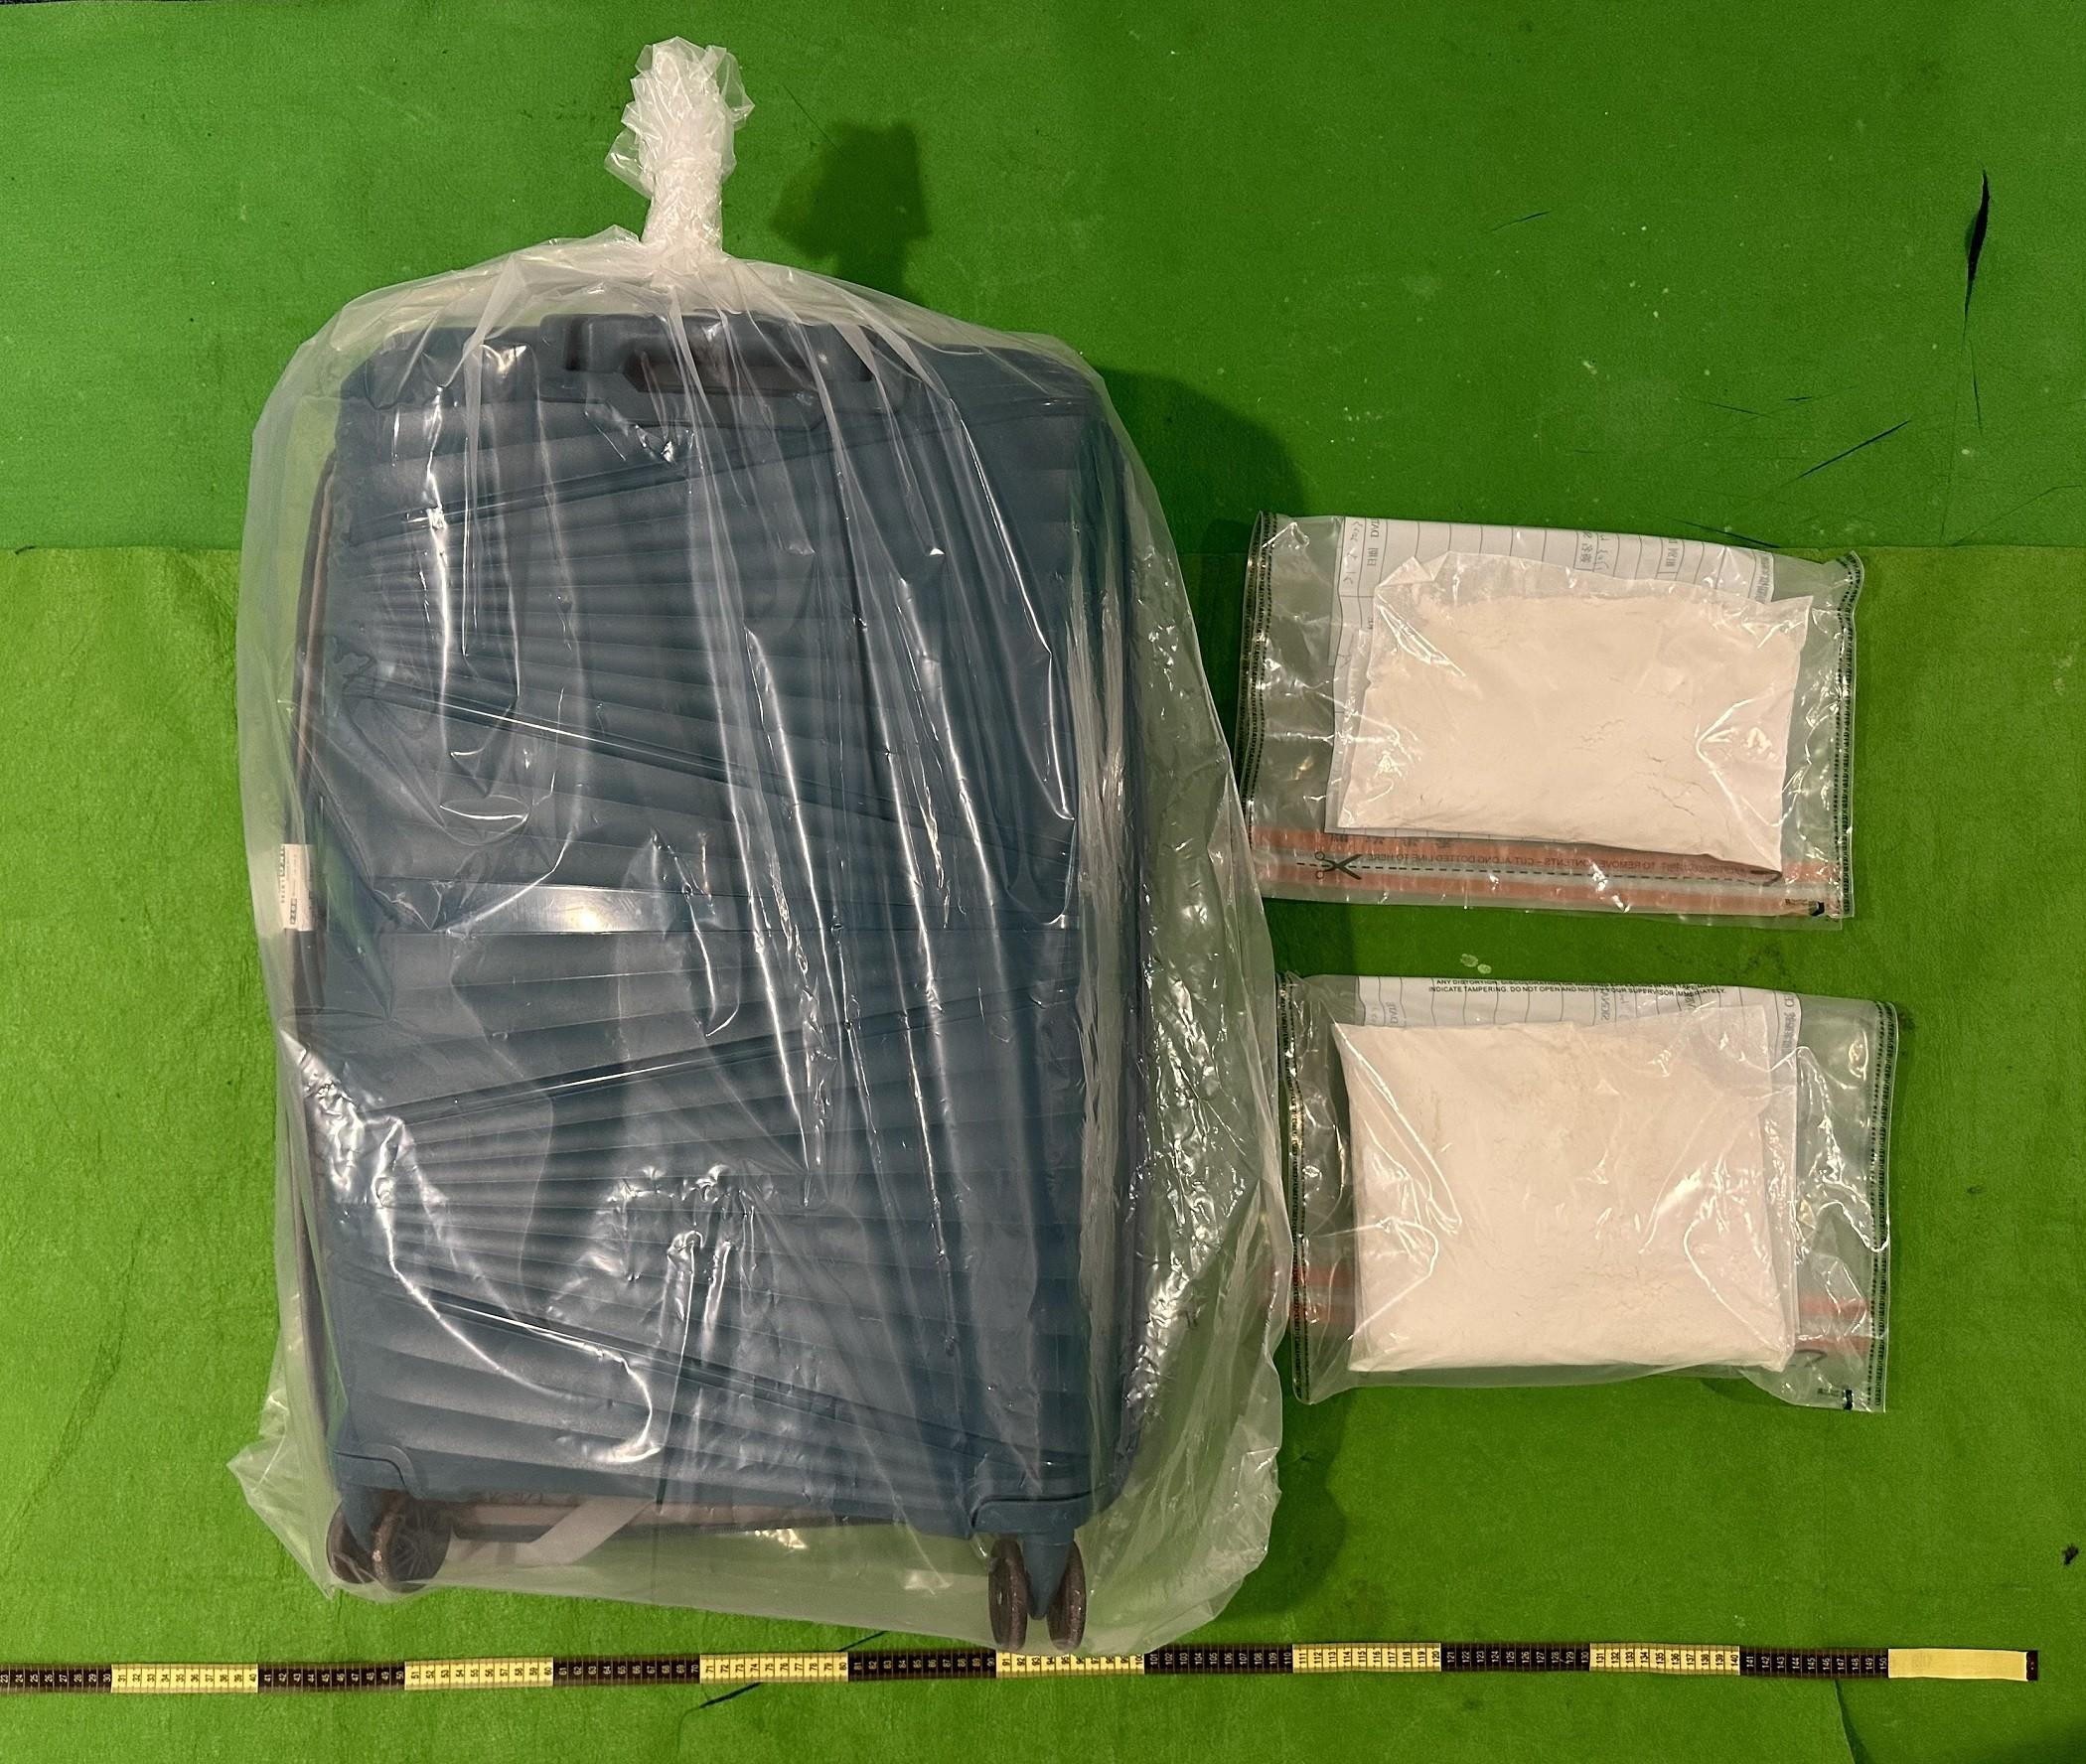 Hong Kong Customs on May 20 seized about three kilograms of suspected cocaine with a total estimated market value of about $2.4 million at Hong Kong International Airport. Photo shows the suspected cocaine seized.